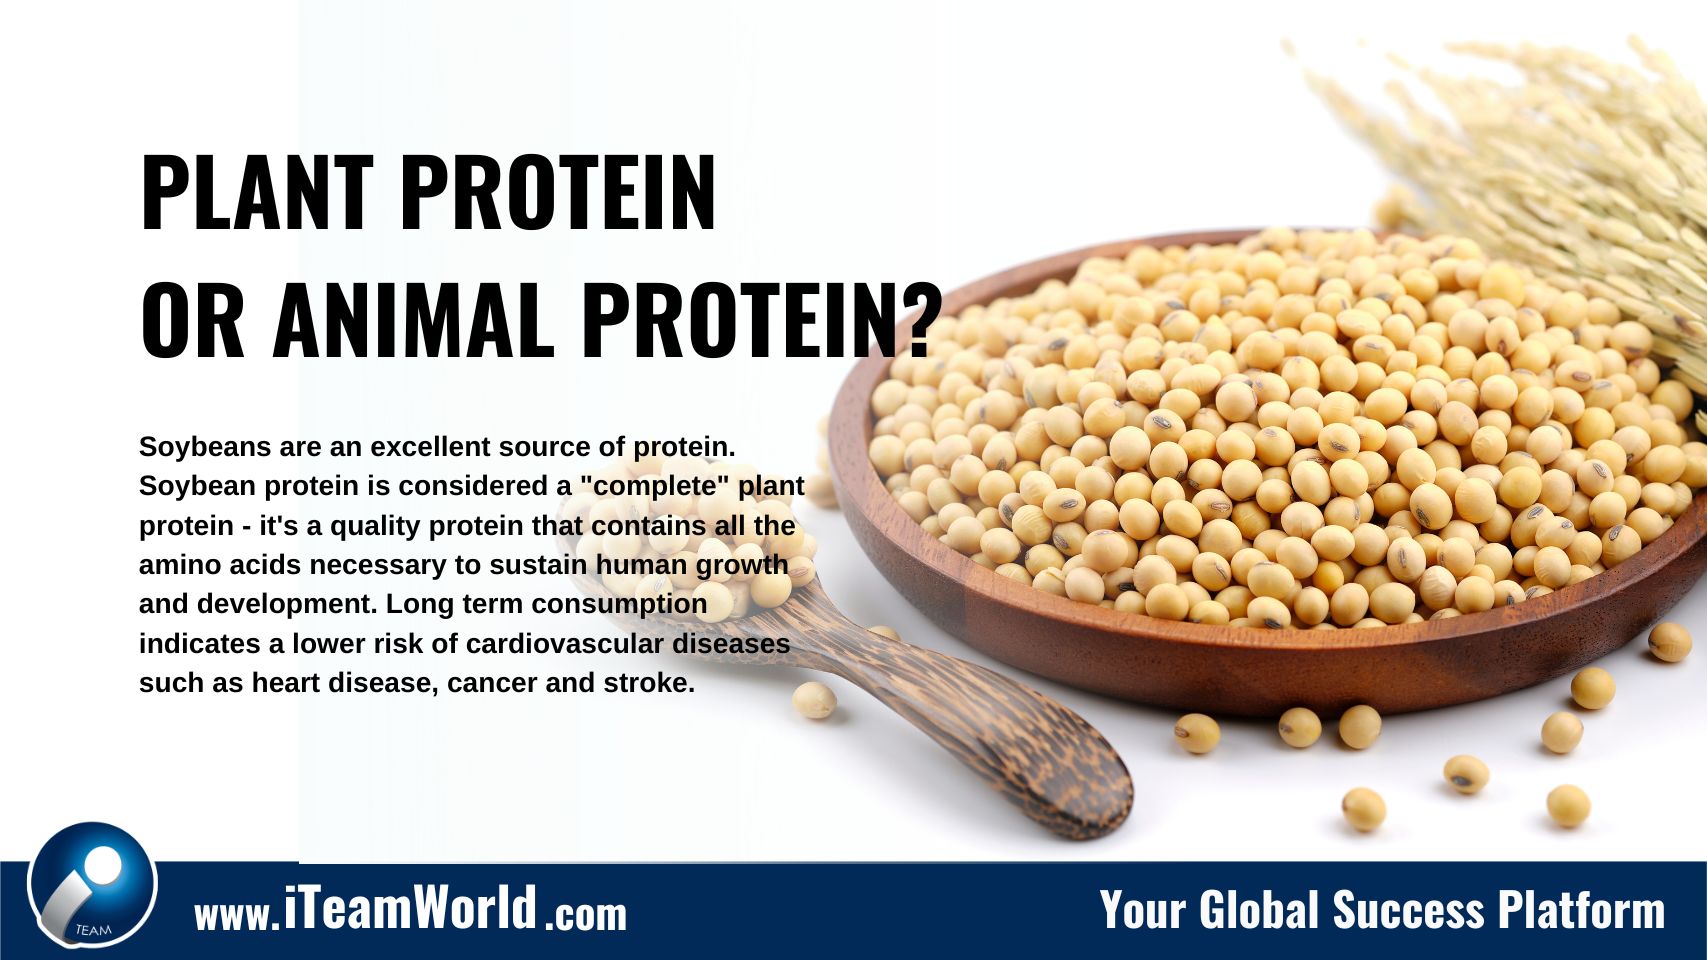 Health: Plant Protein or Animal Protein